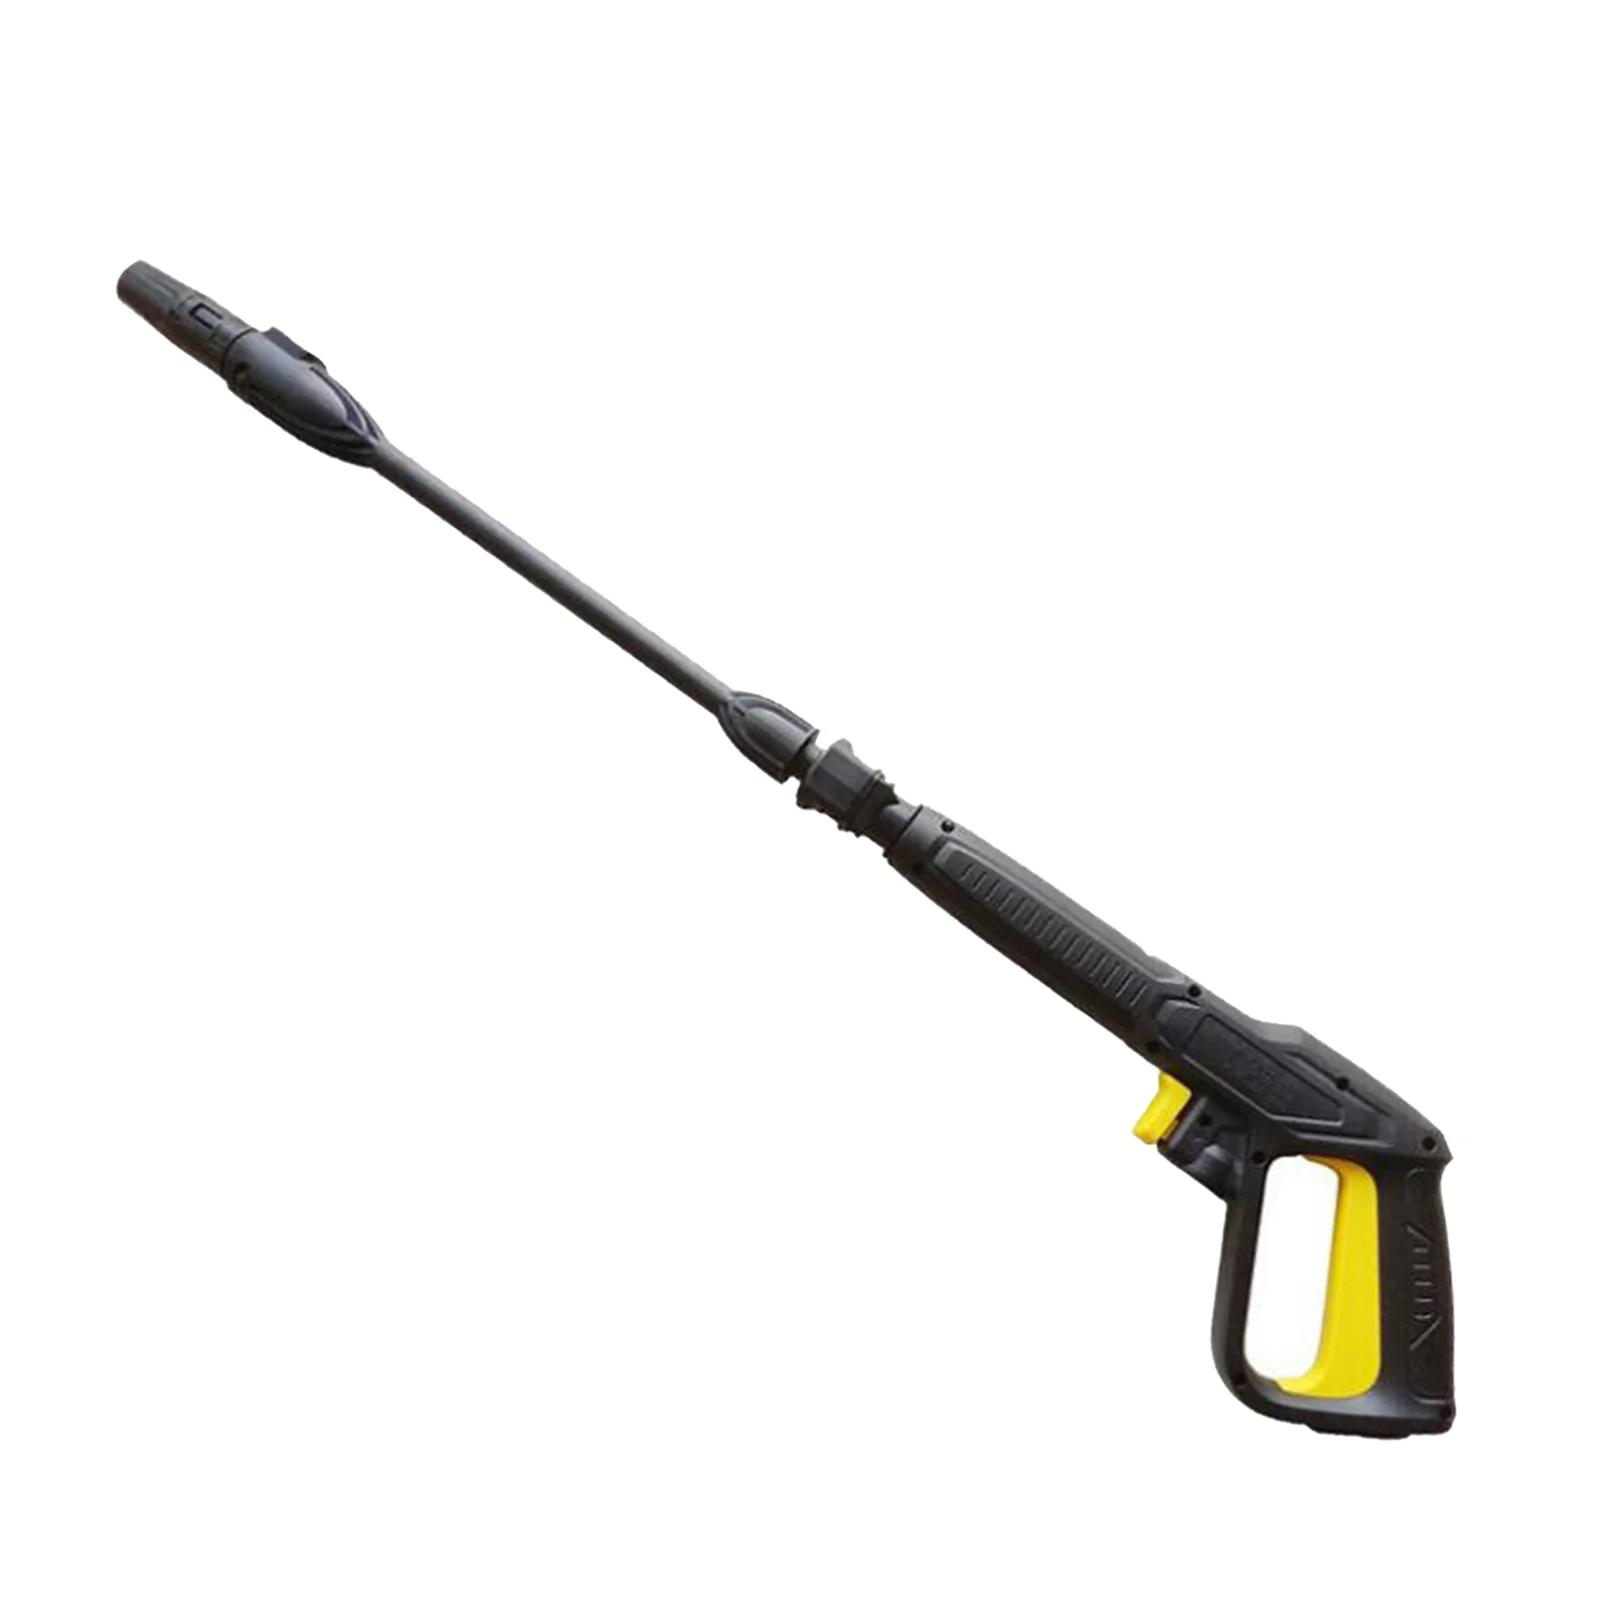 Replacement Pressure Washer Gun 2175 PSI with Extension Wand Nozzles for Karcher K-series Garden Watering Roof Cleaning